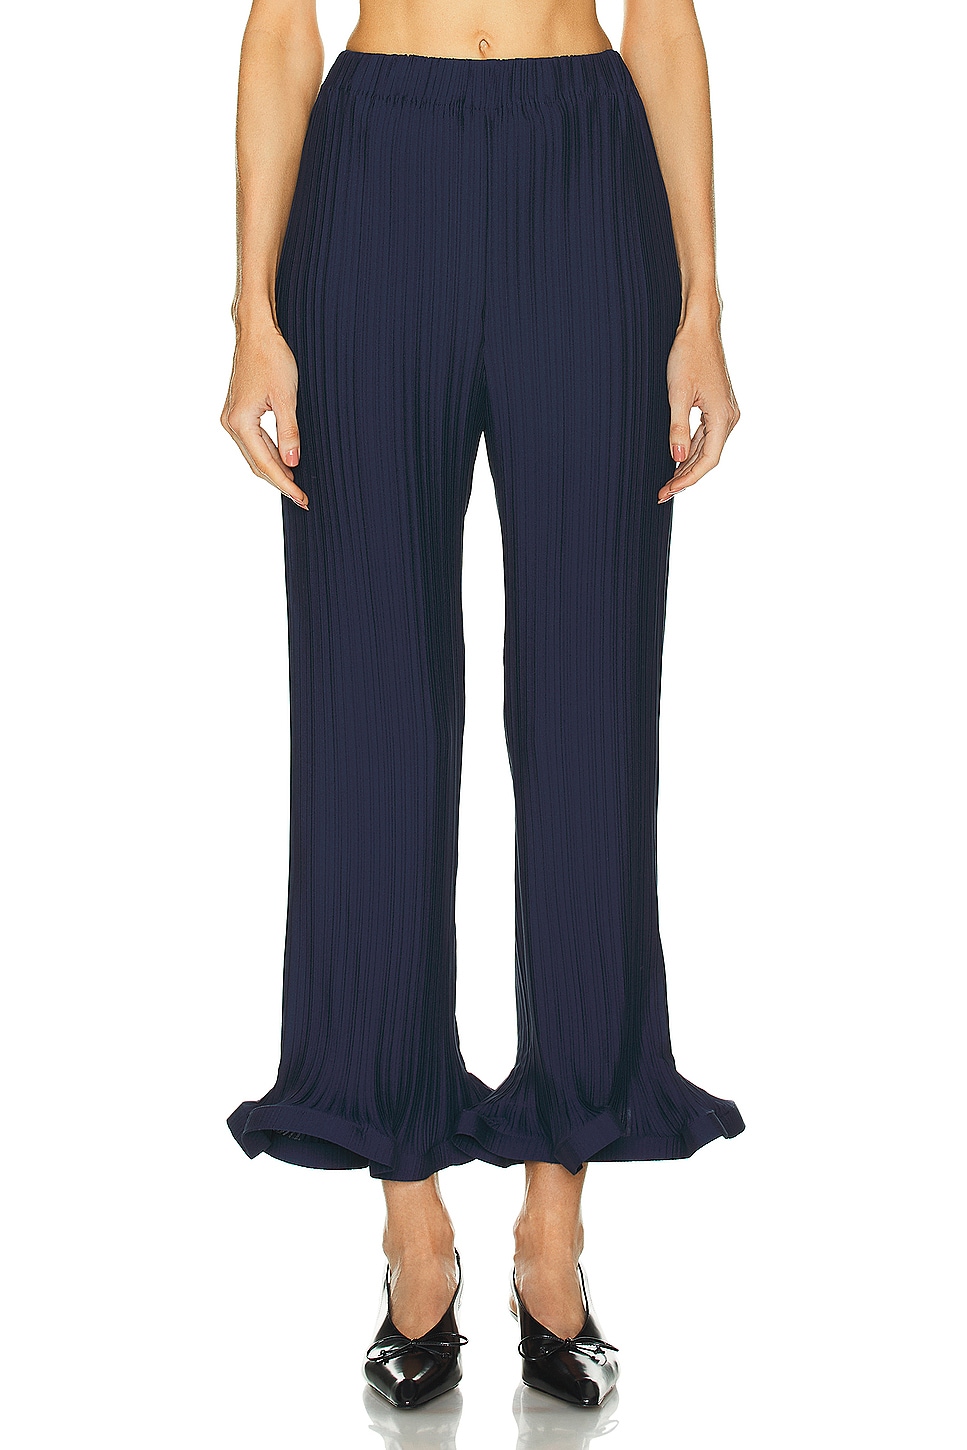 Pleated Pant in Navy